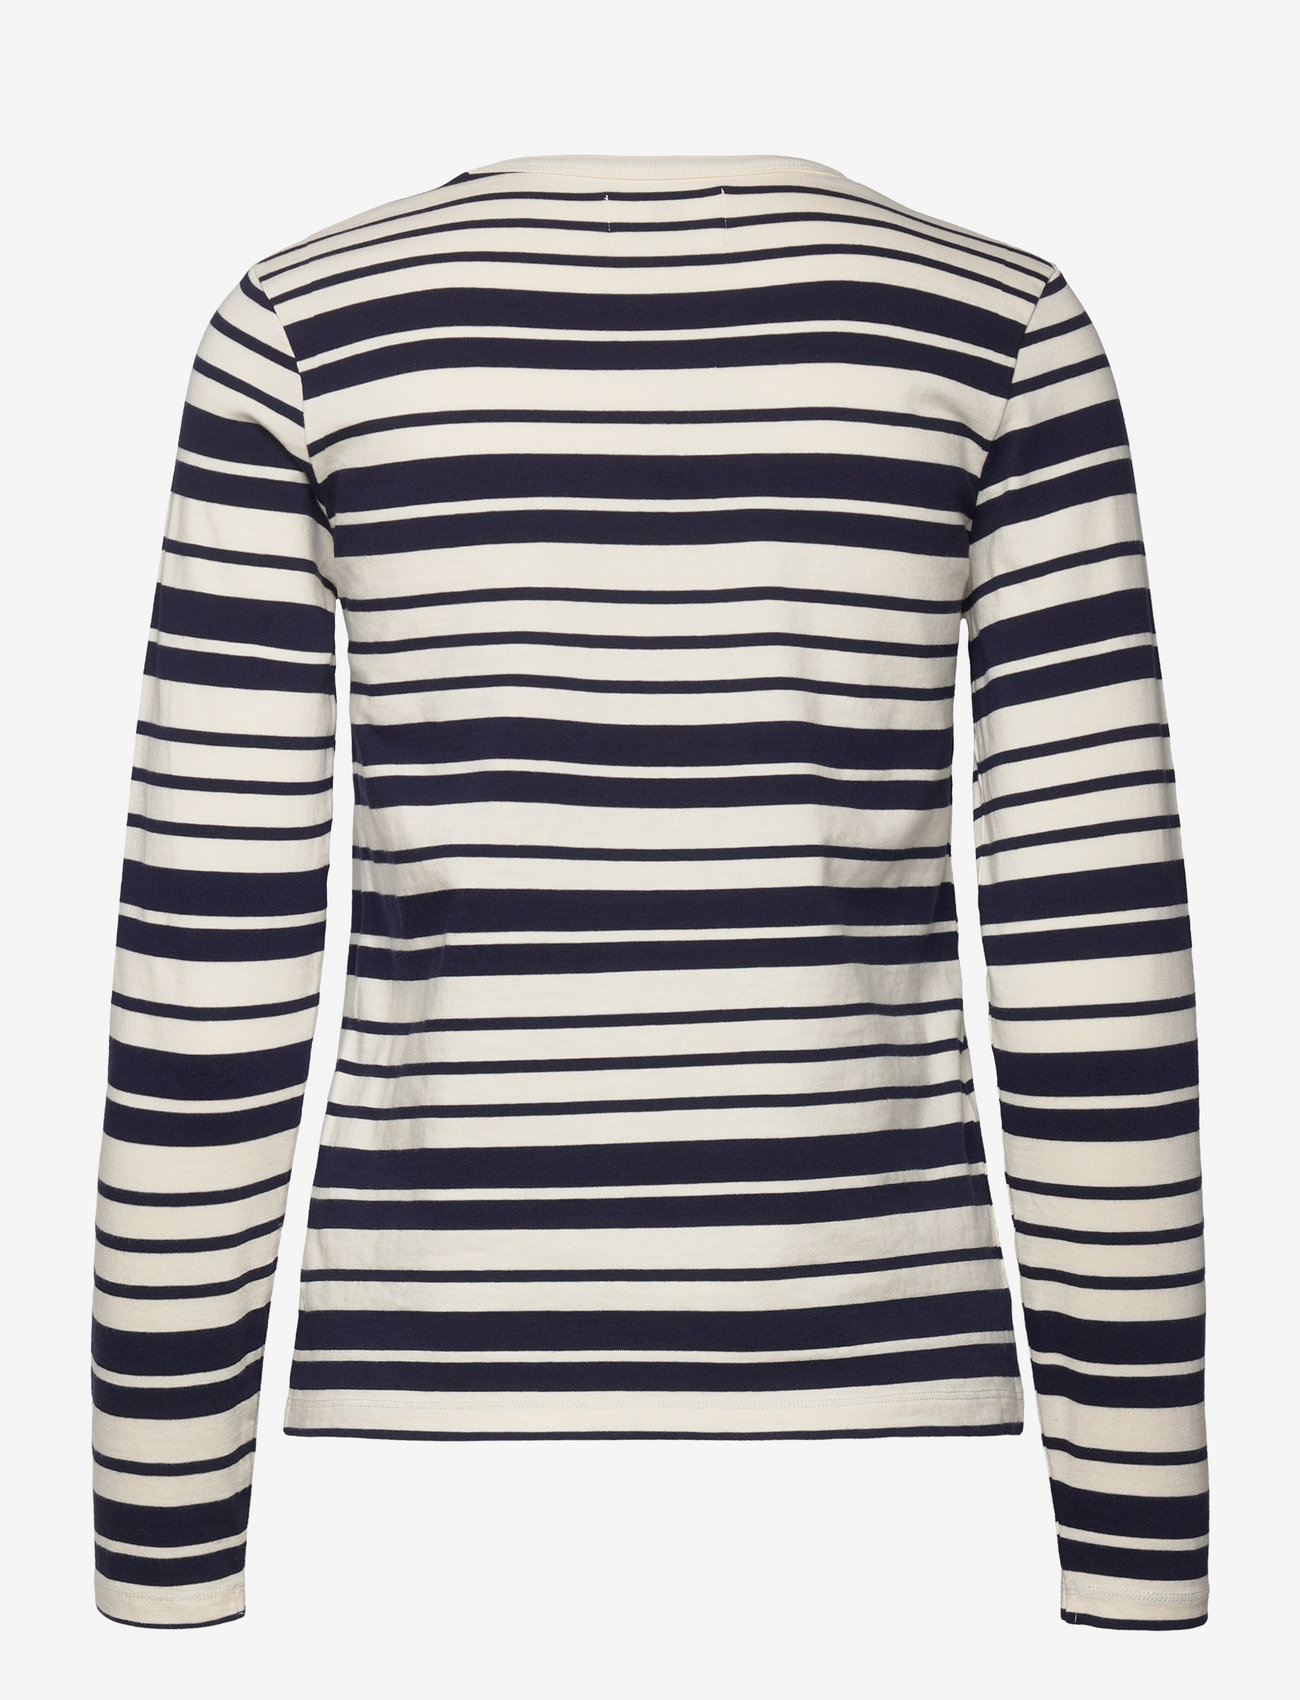 Double A by Wood Wood - Moa stripe long sleeve - langærmede toppe - off-white/navy stripes - 1